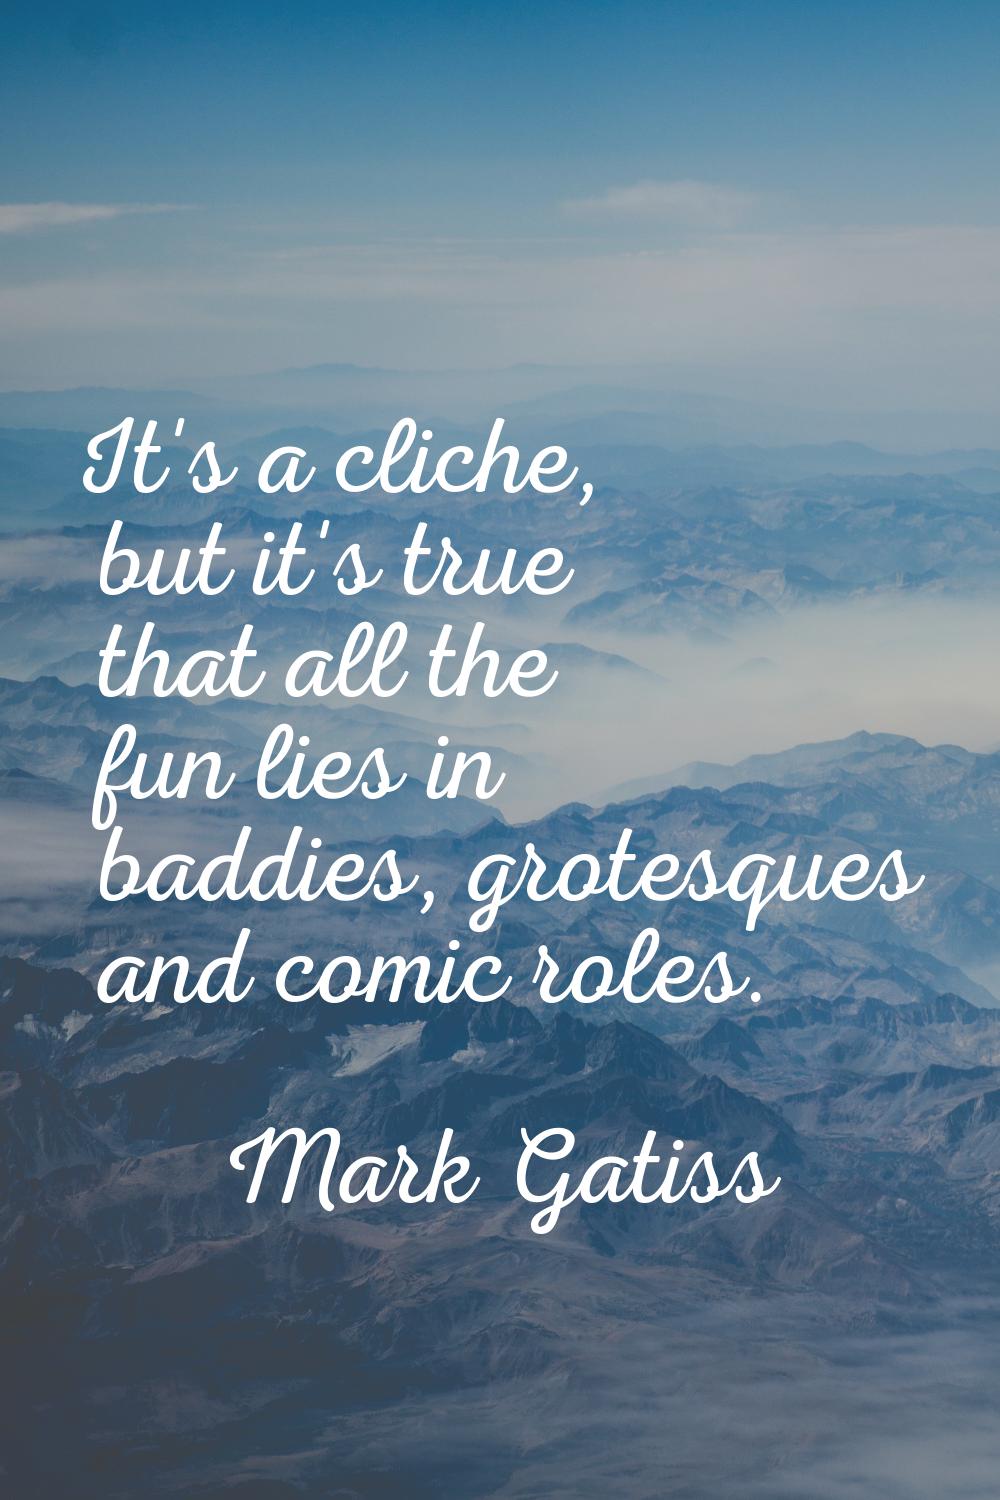 It's a cliche, but it's true that all the fun lies in baddies, grotesques and comic roles.